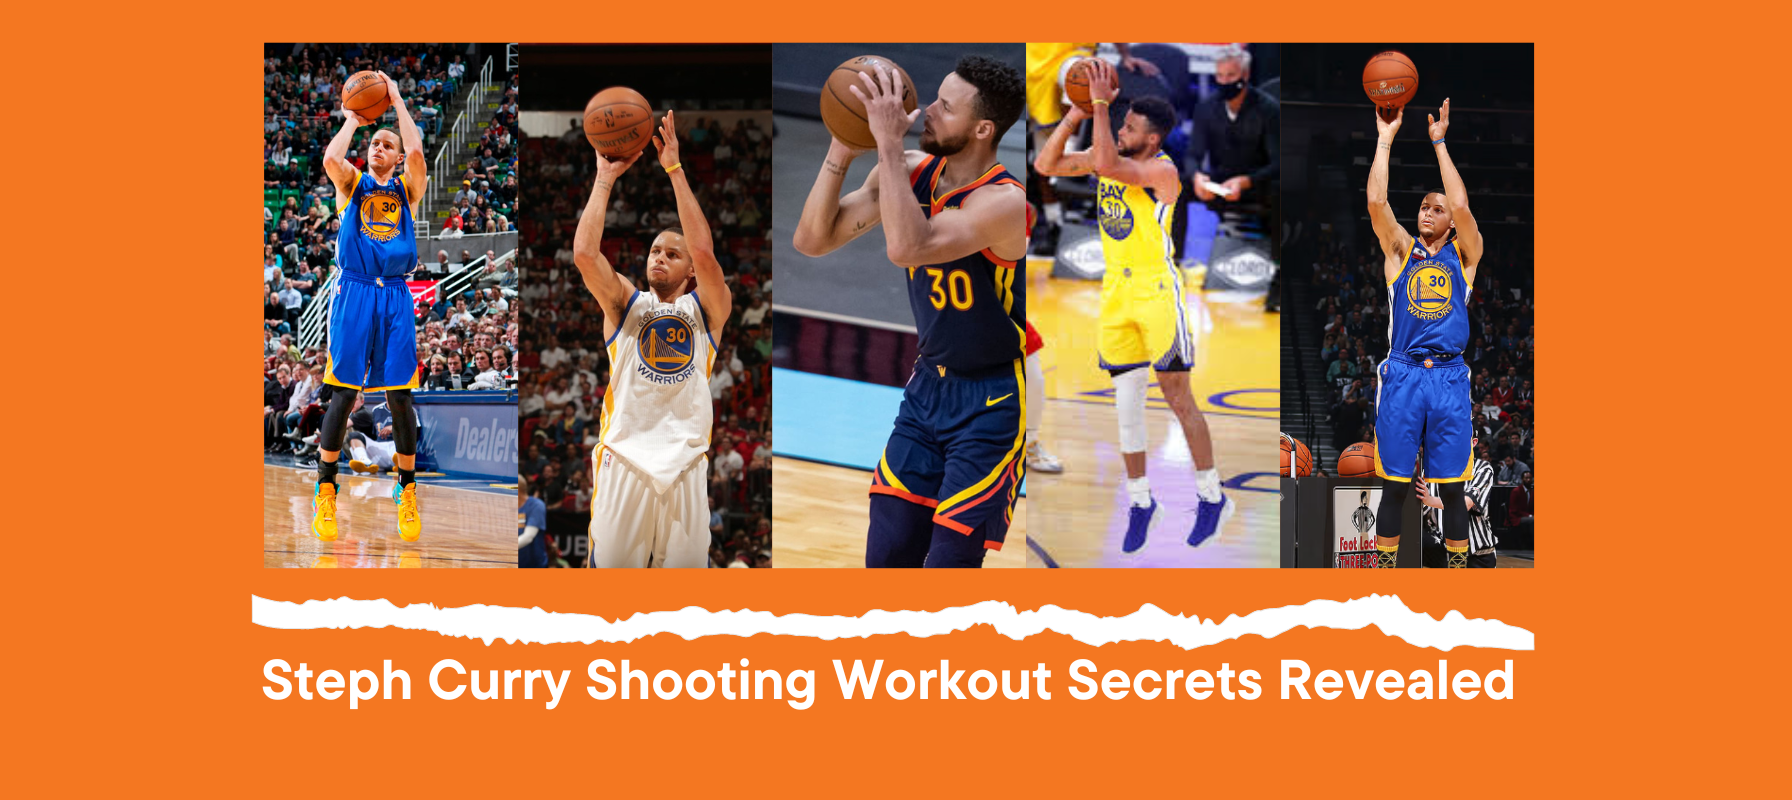 Steph Curry Shooting Workout Secrets Revealed